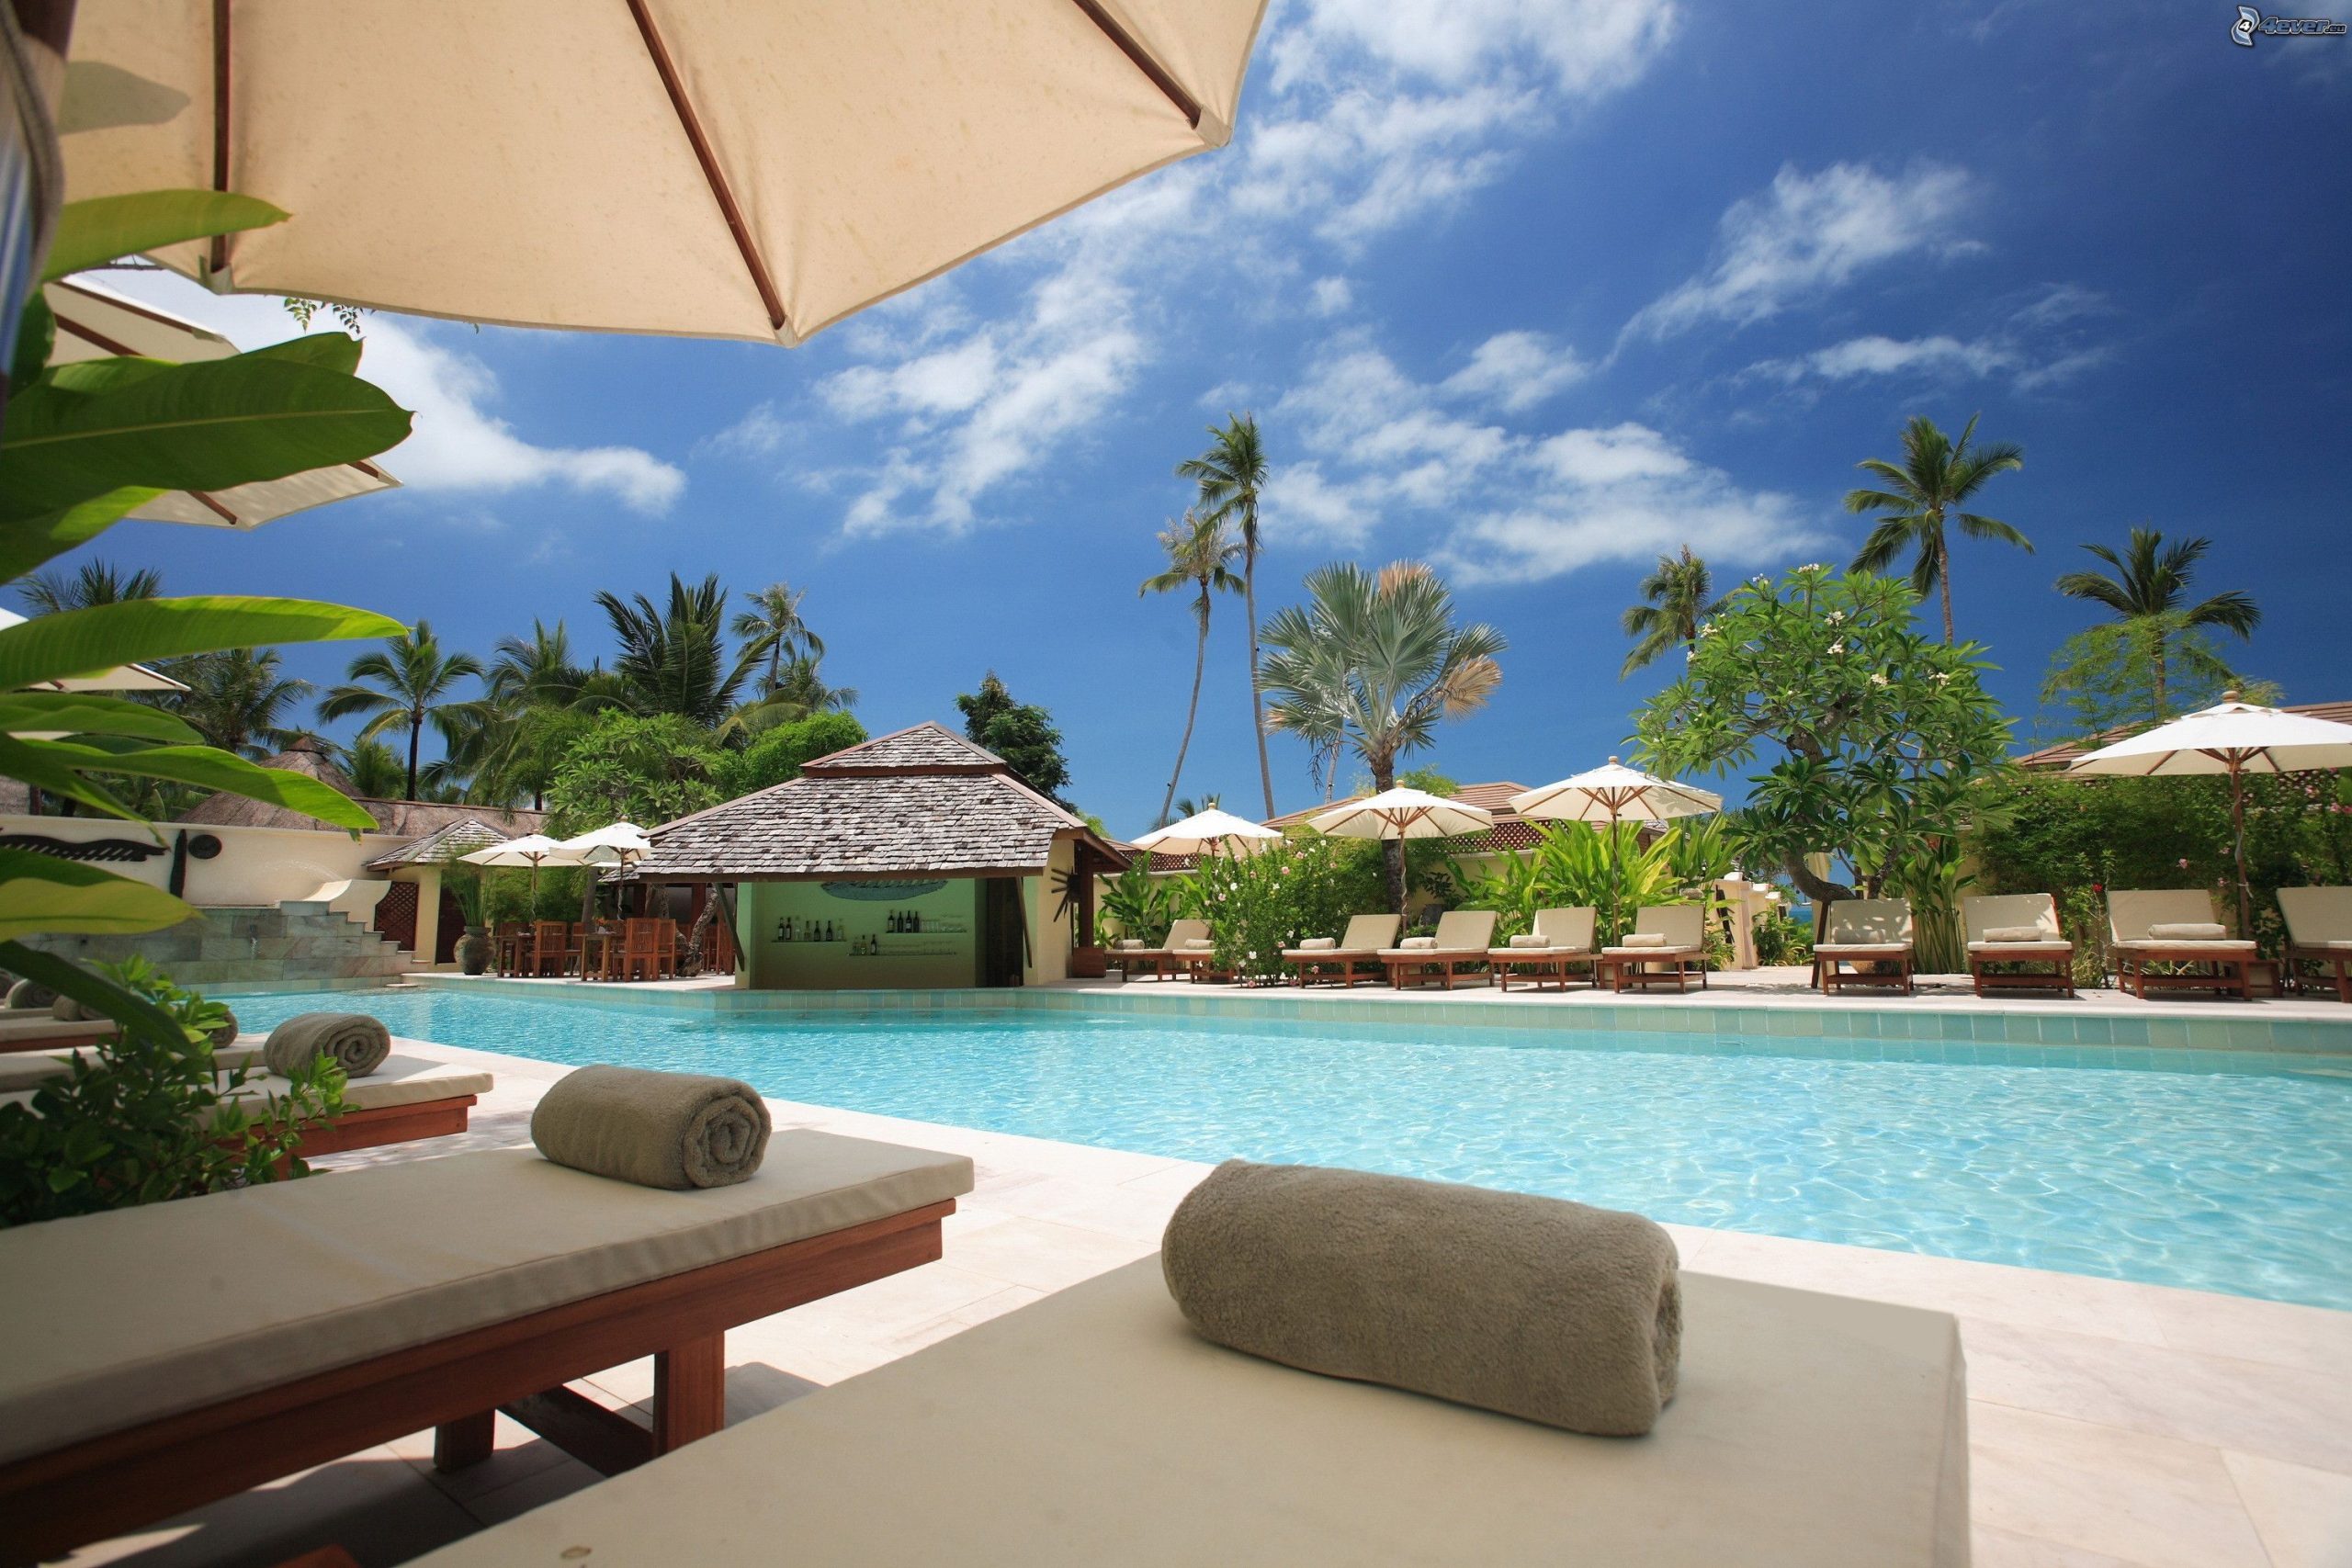 Members in hotel rewards programs may receive a complimentary night at any of the brand’s hotels or resorts worldwide.